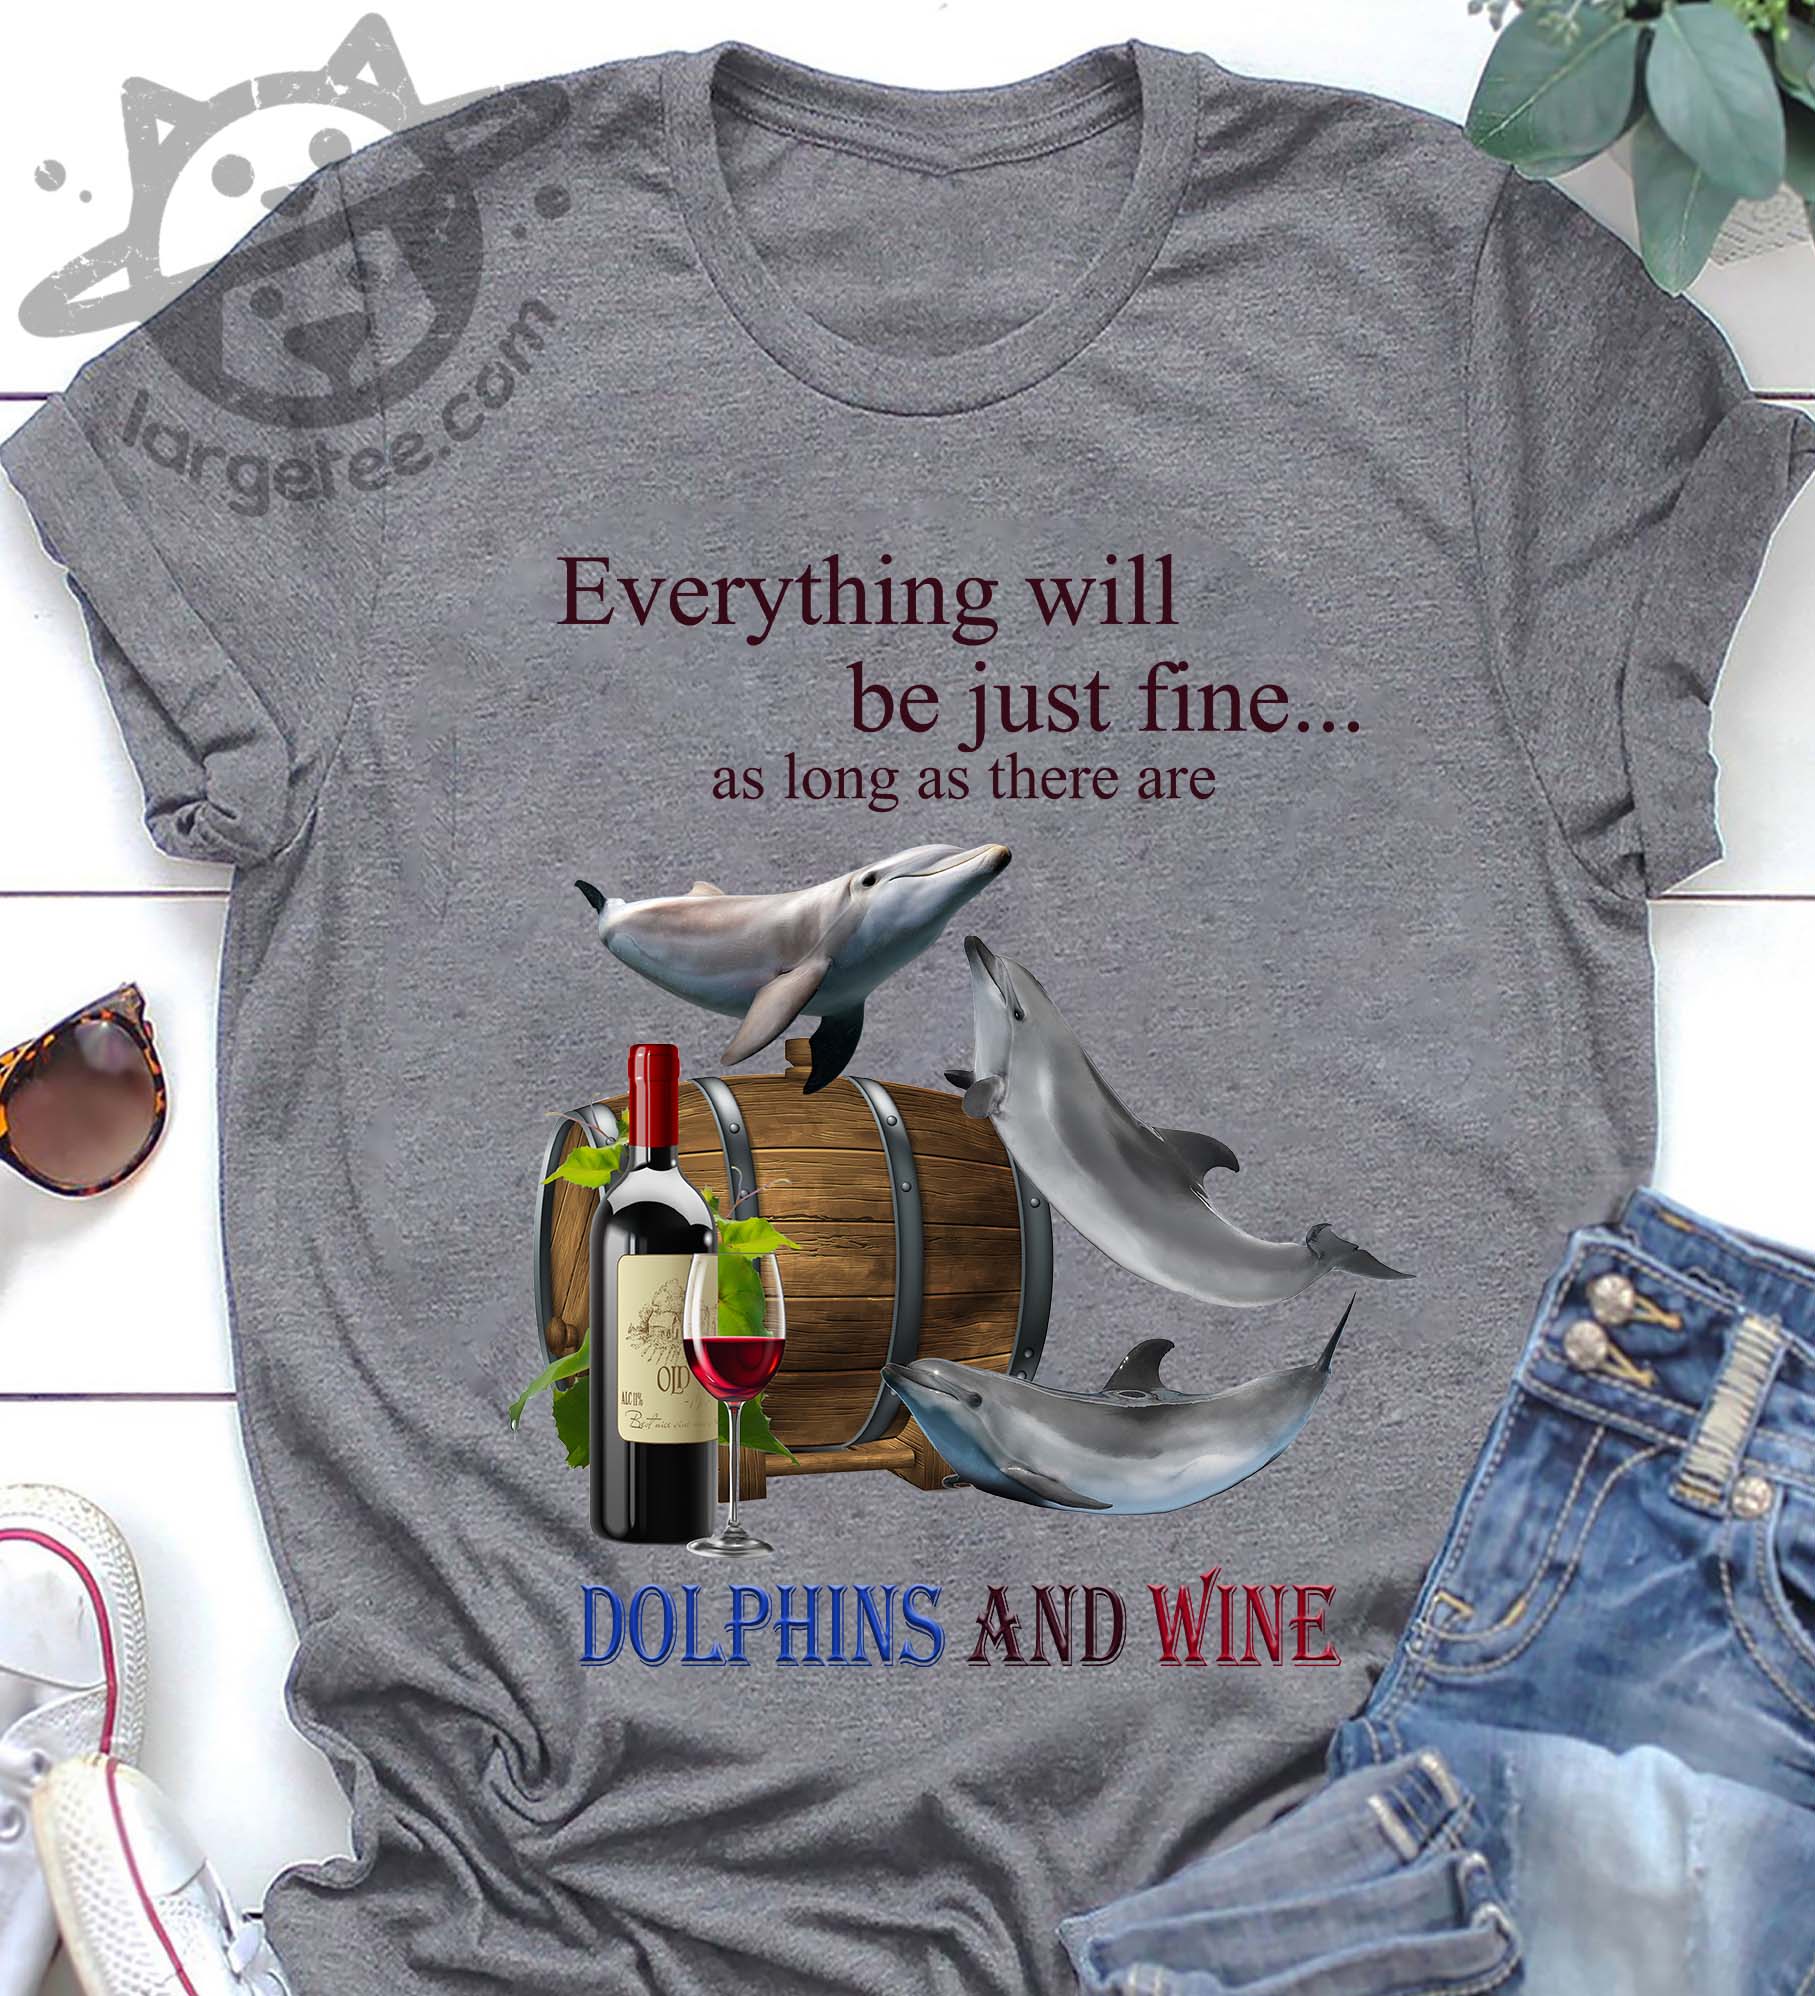 Everything will be just fine as long as there are Dolphins and wine